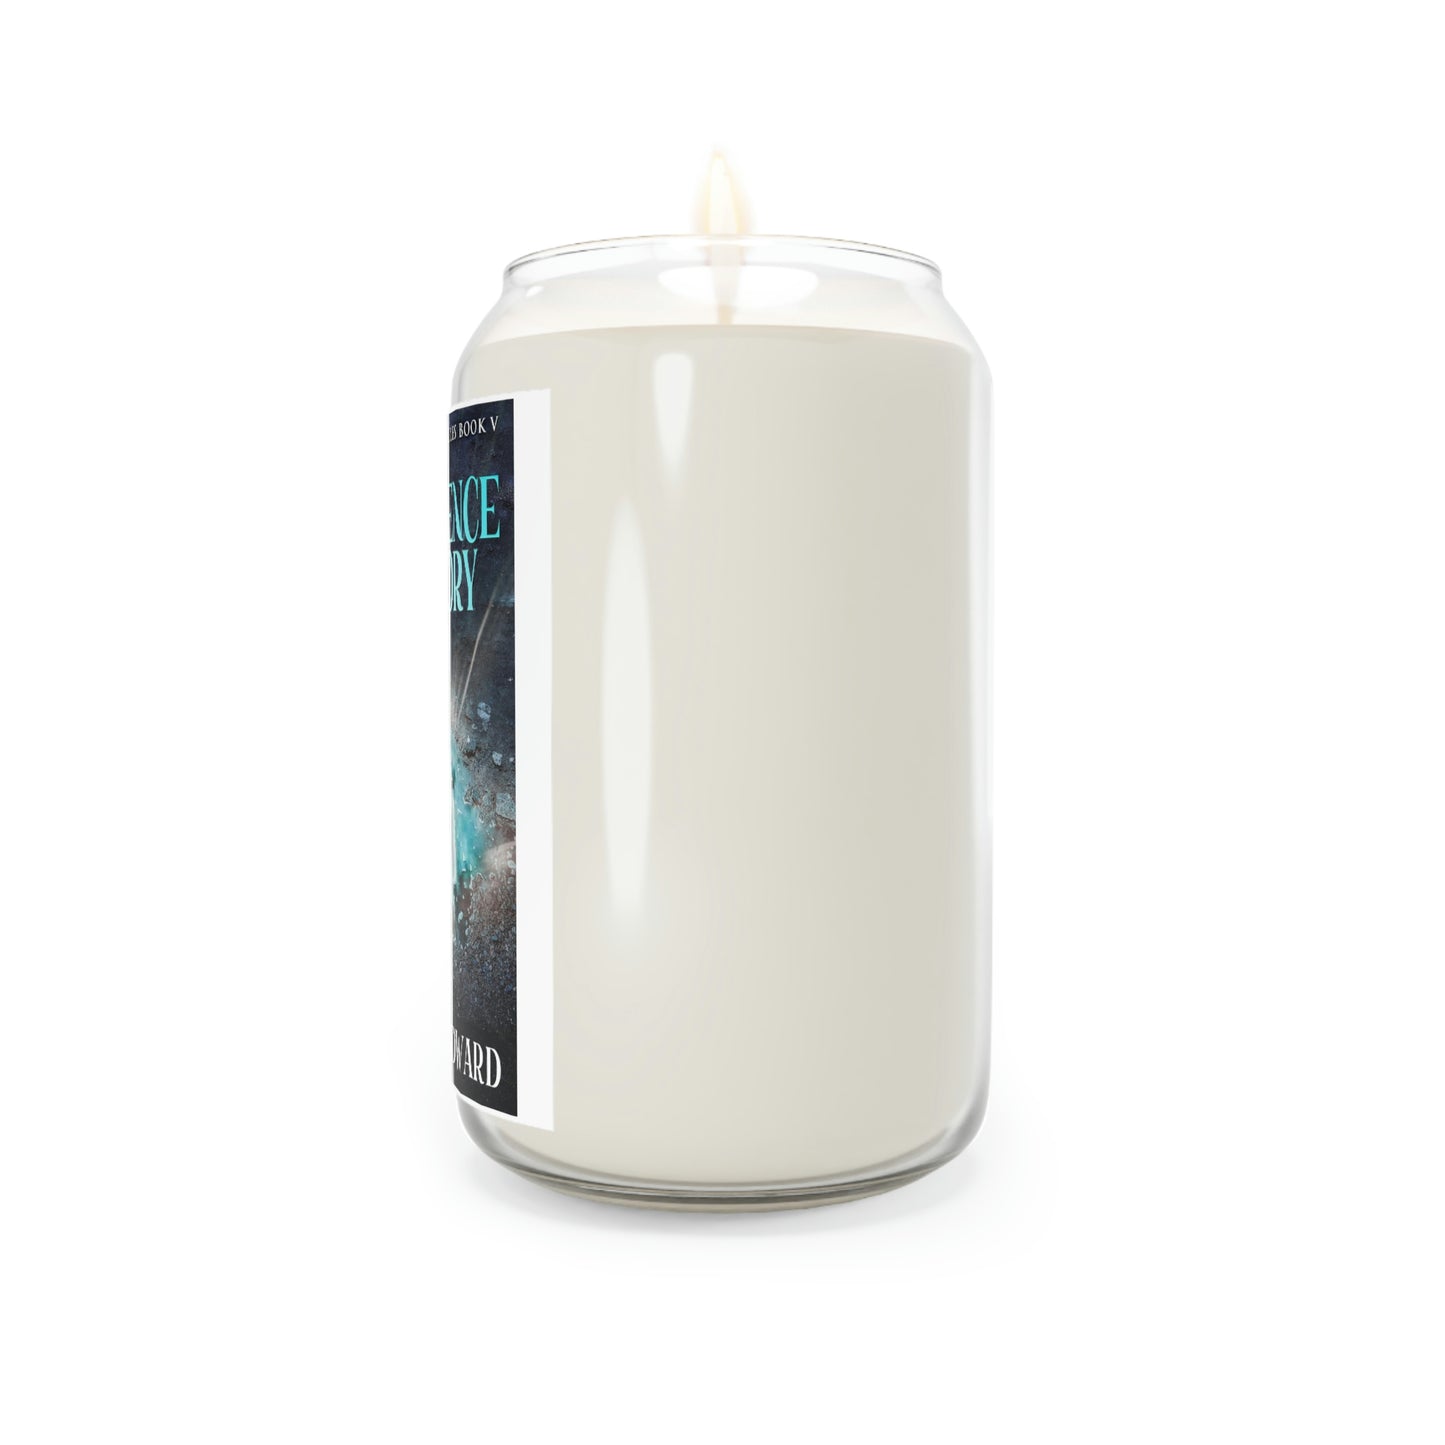 Persistence Of Memory - Scented Candle